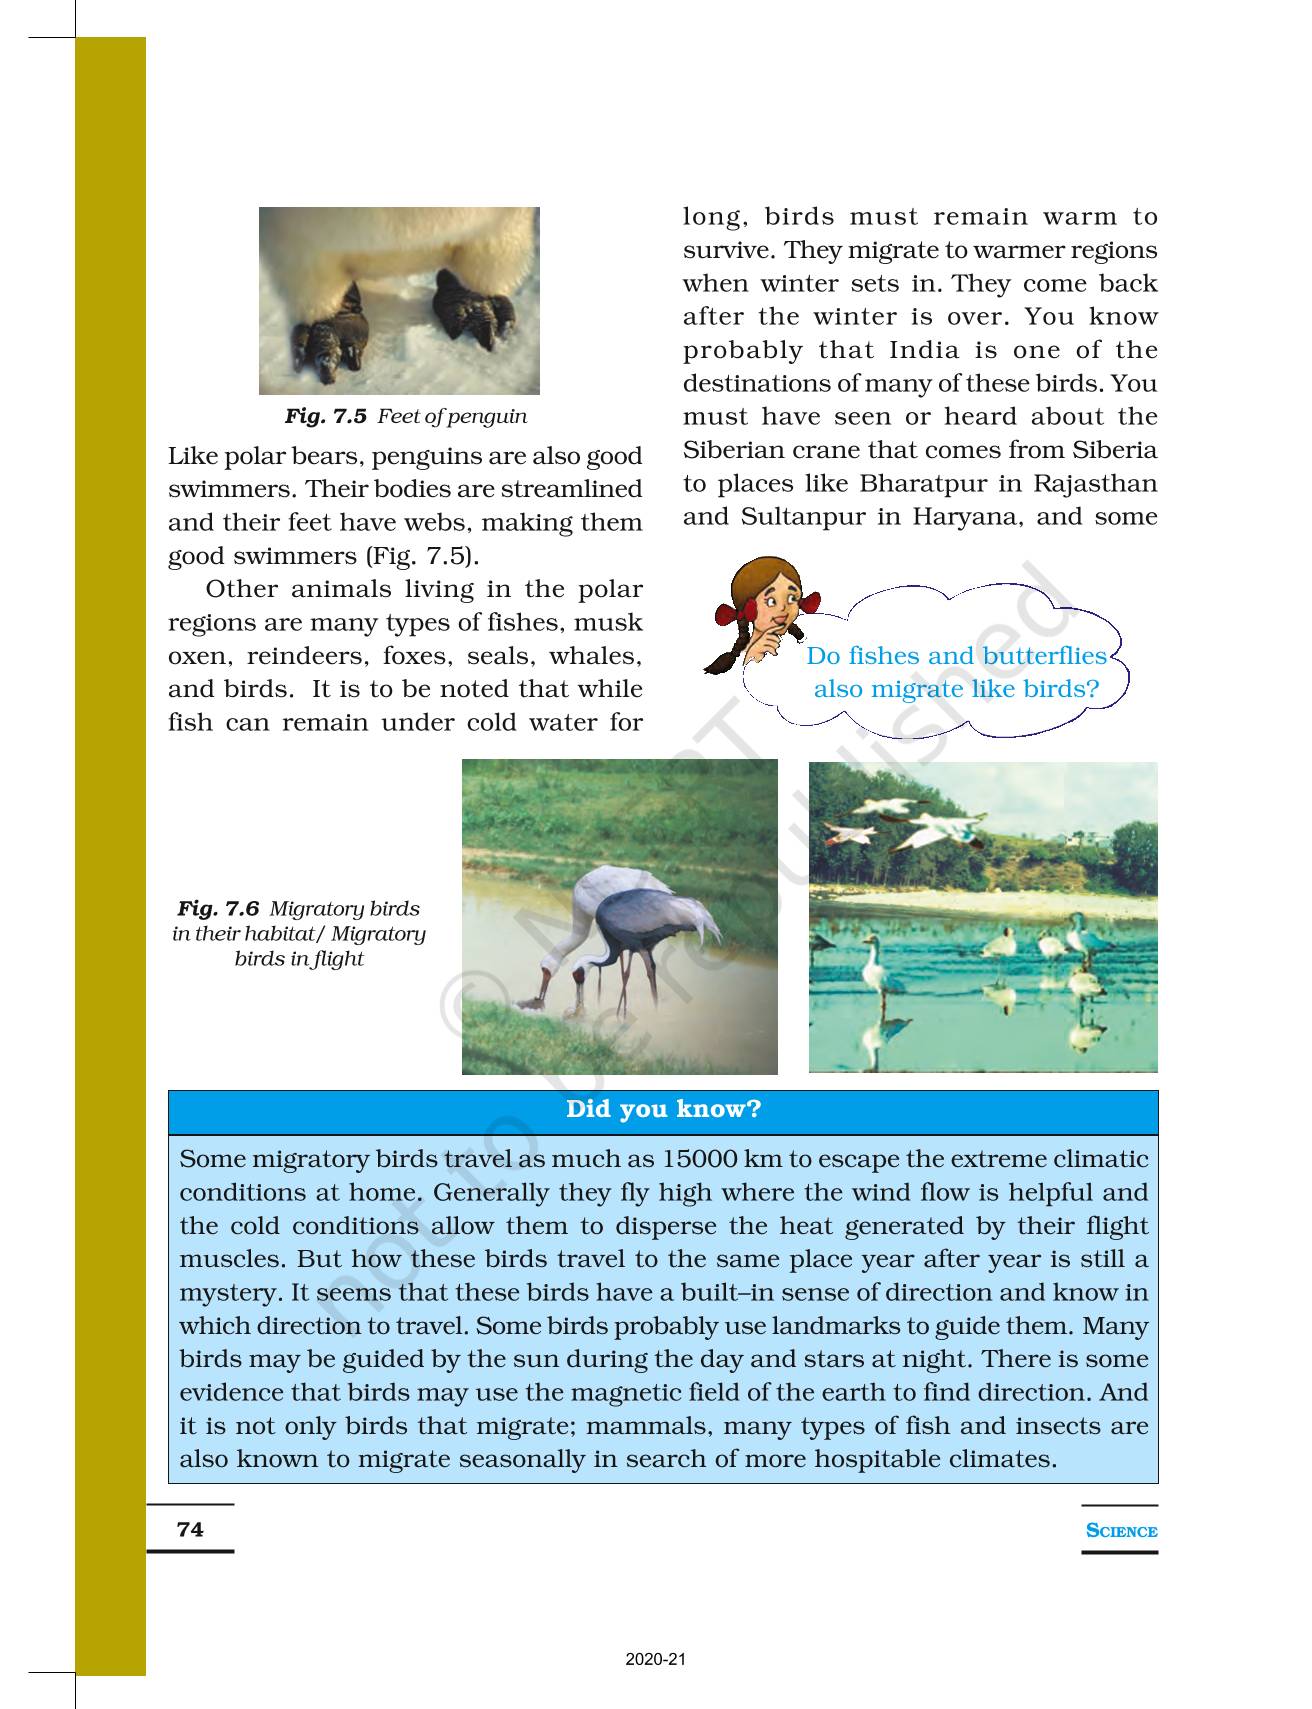 Weather Climate And Adaptations Of Animals To Climate - NCERT Book of Class  7 Science